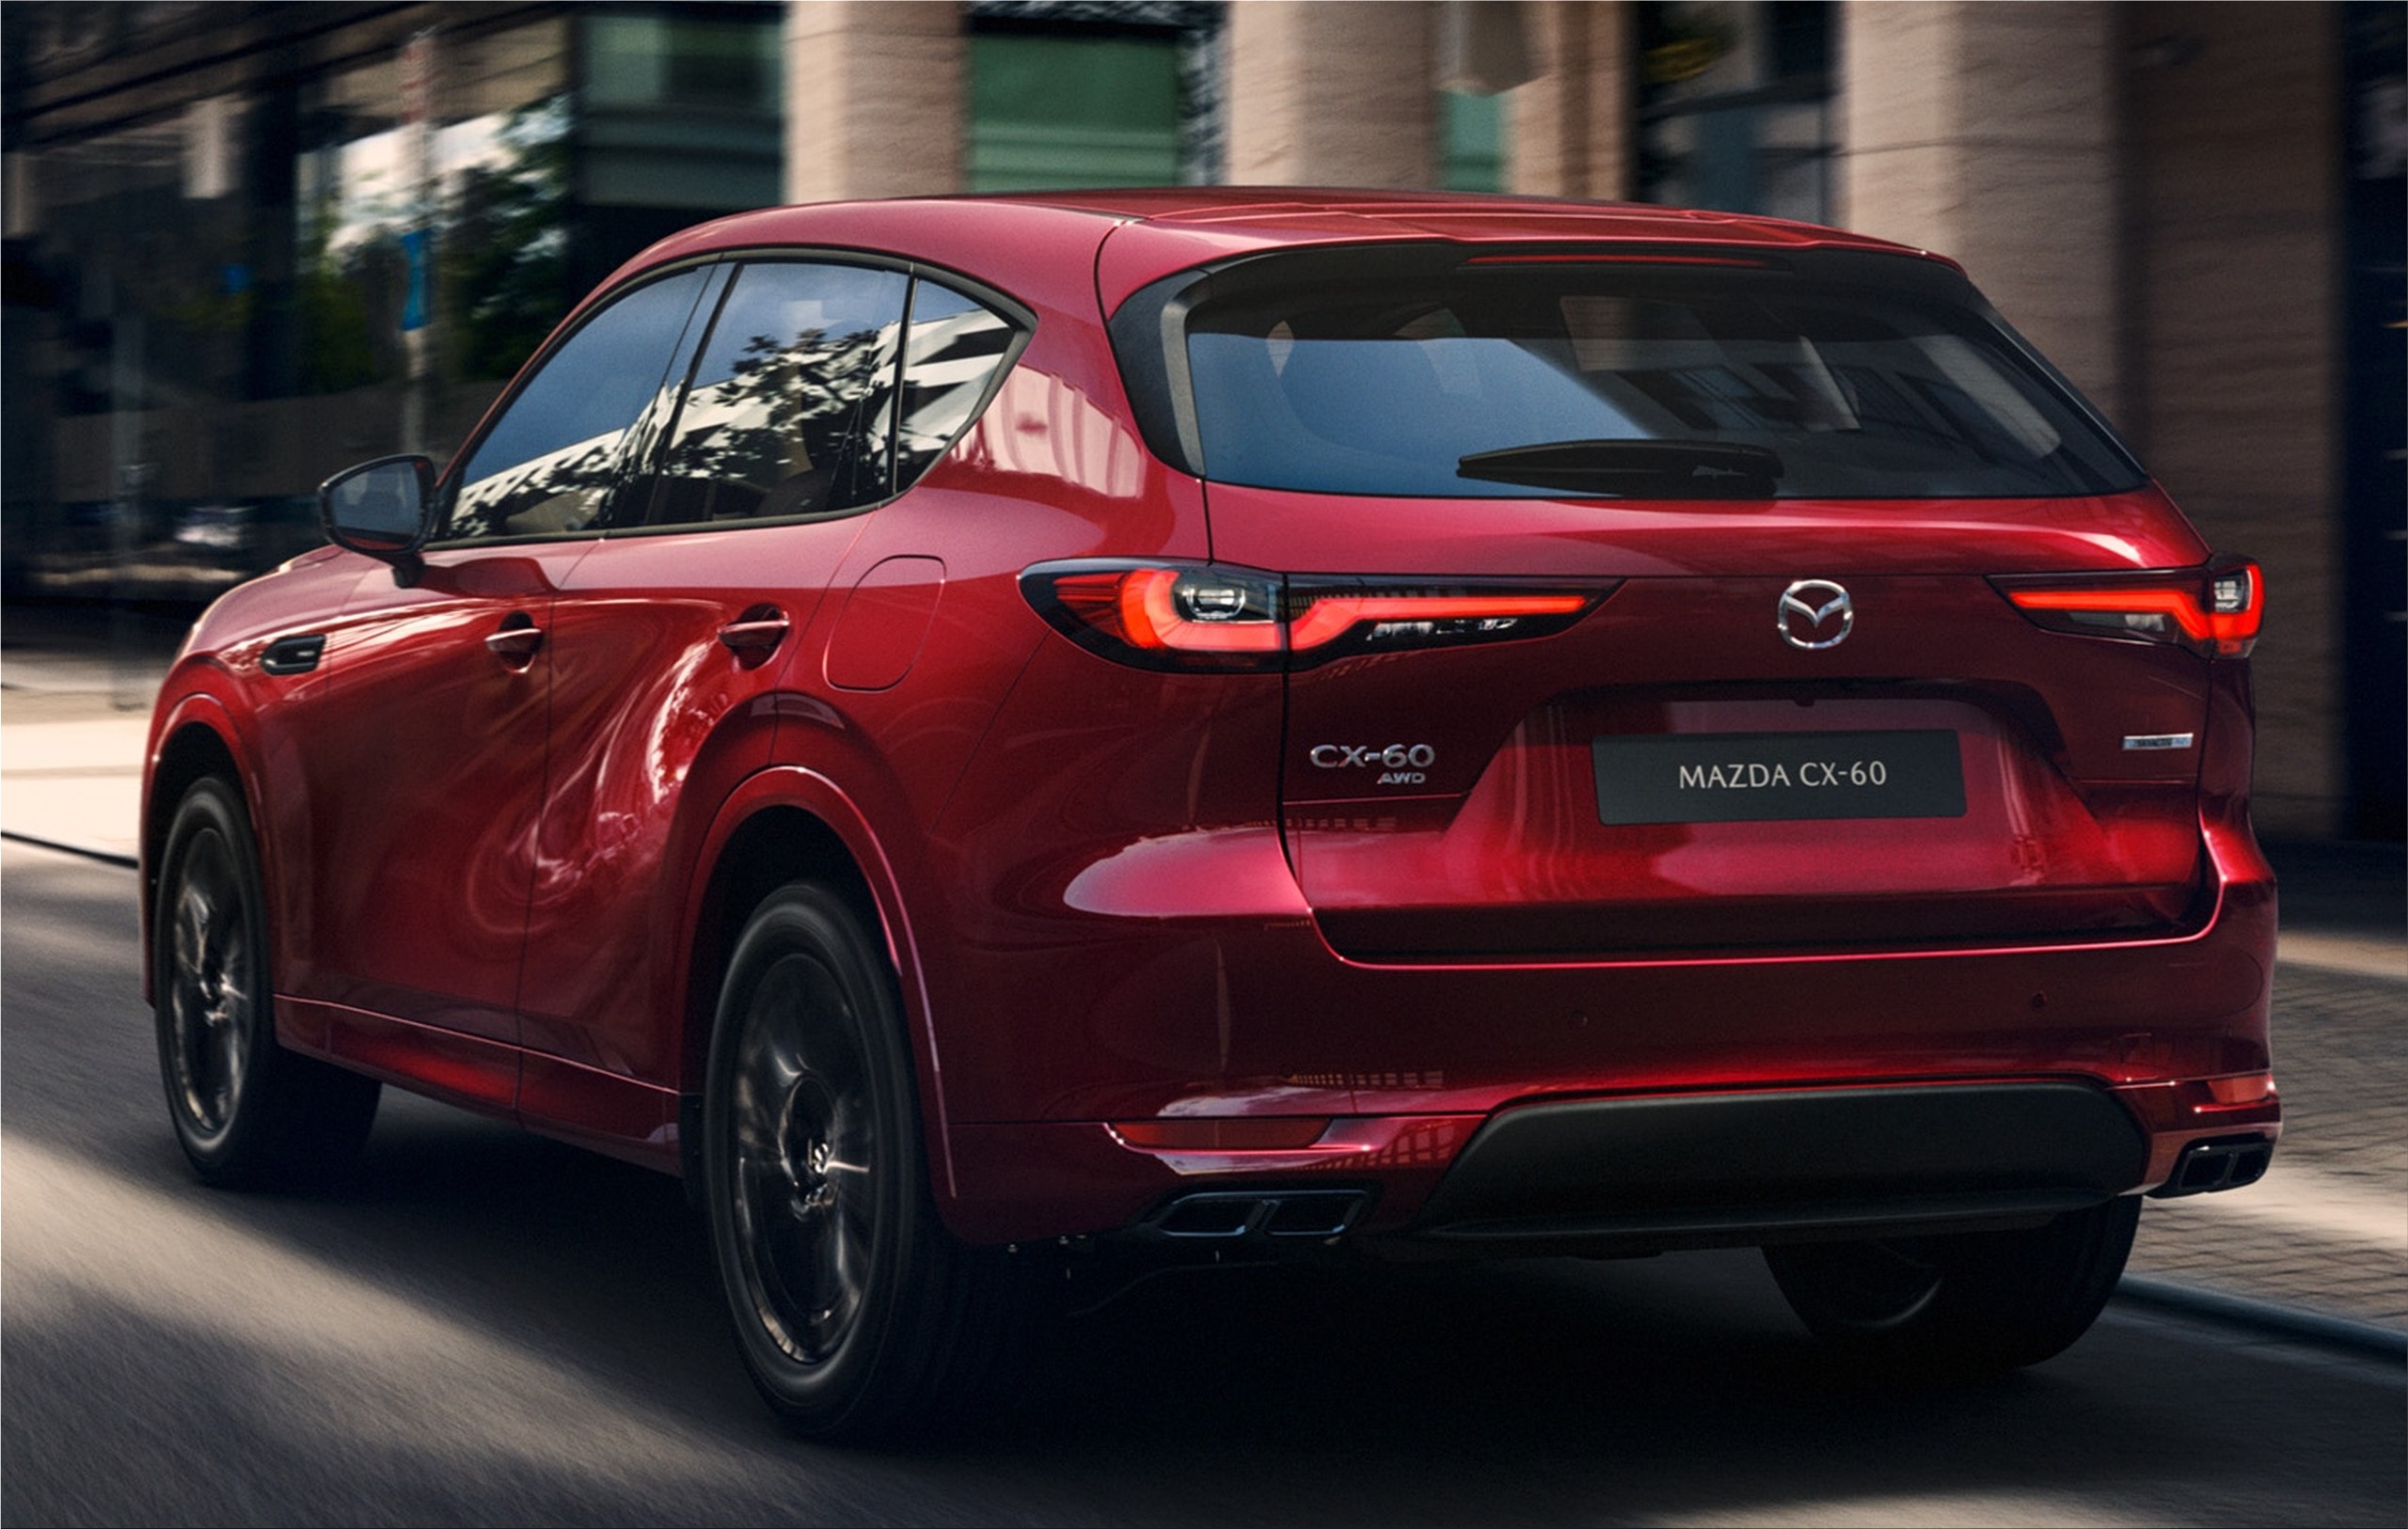 The new Mazda CX-60 PHEV SUV: pricing, pictures, and technical specs